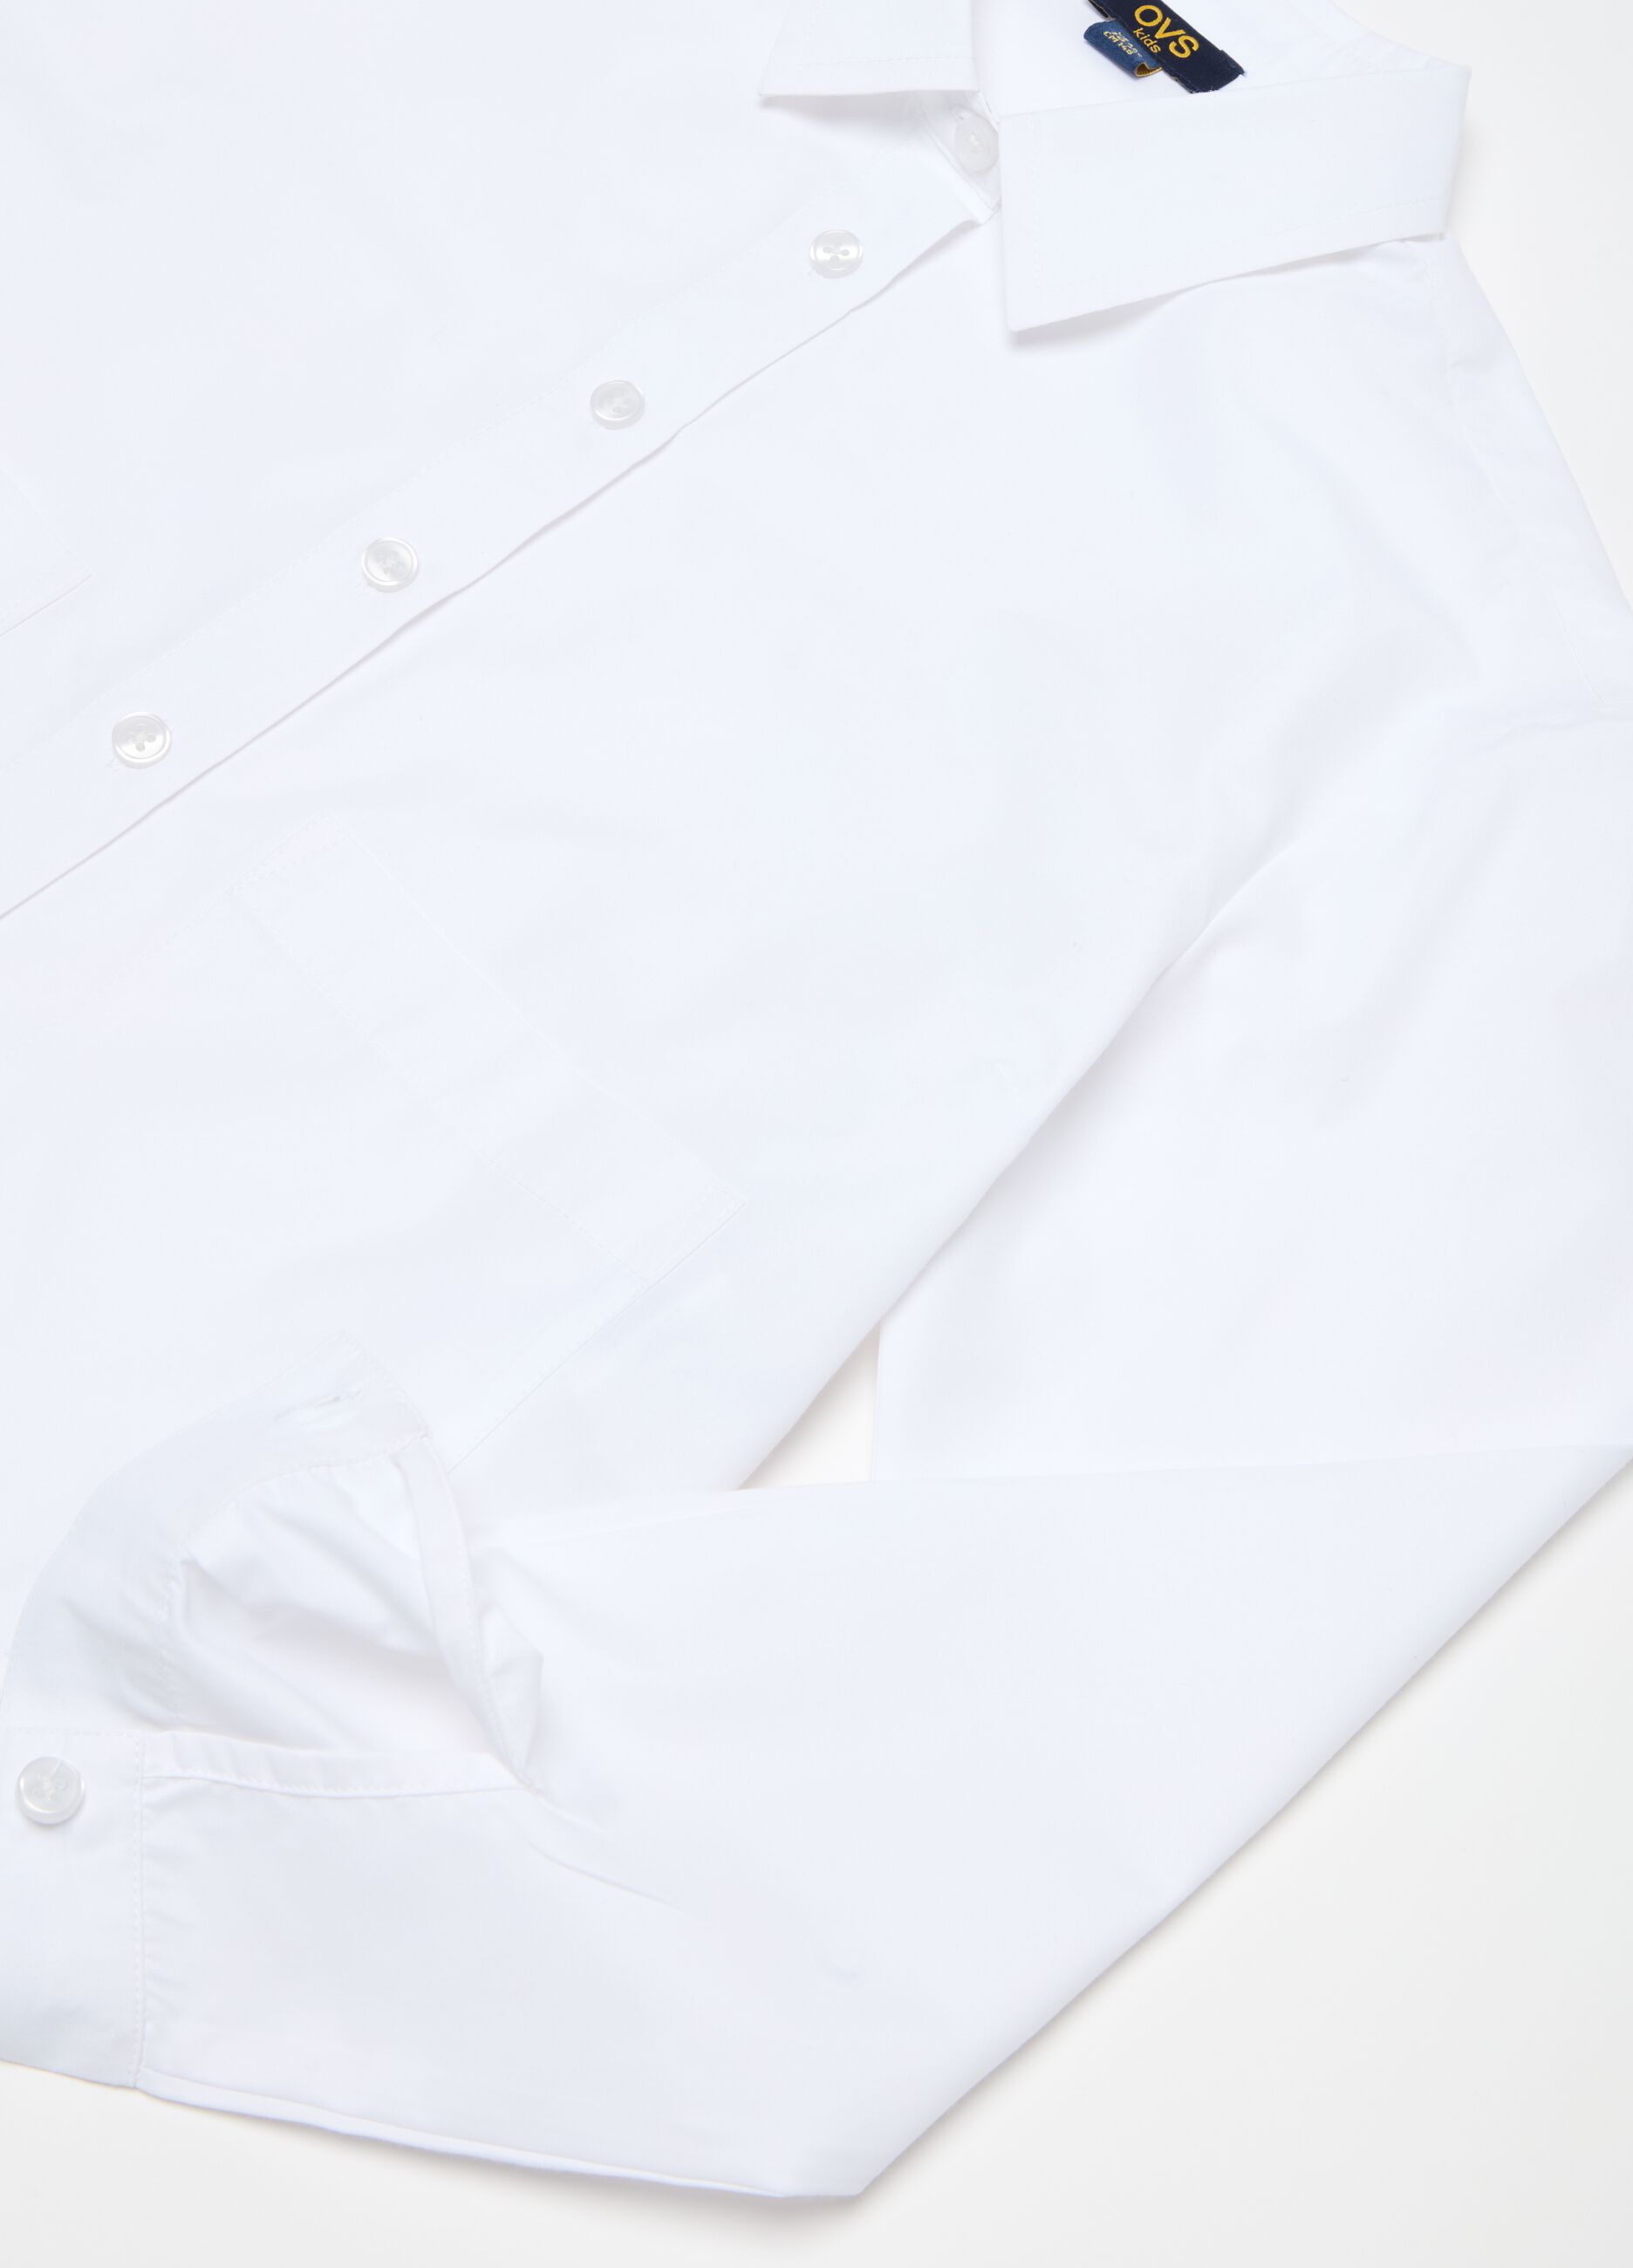 Cropped shirt with pockets